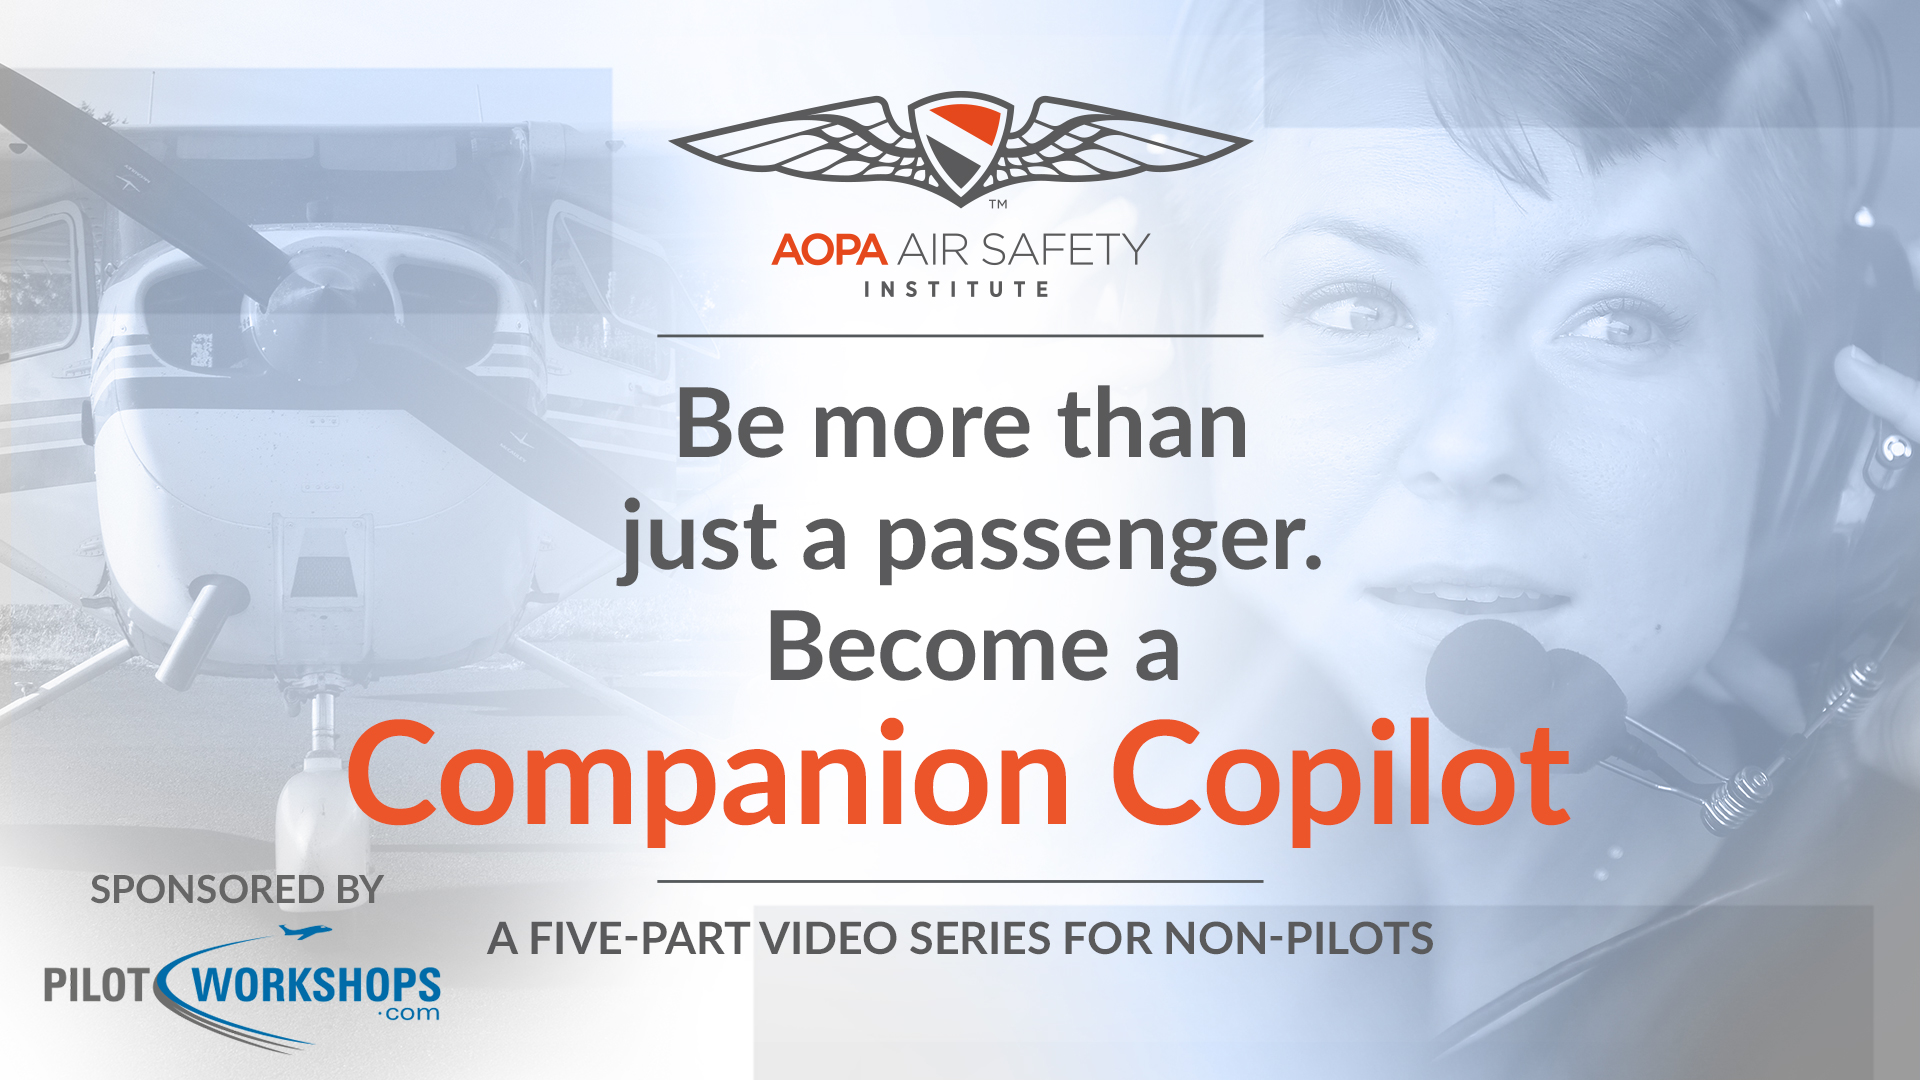 Companion Copilot Video Series Be more than just a passenger on your next general aviation flight